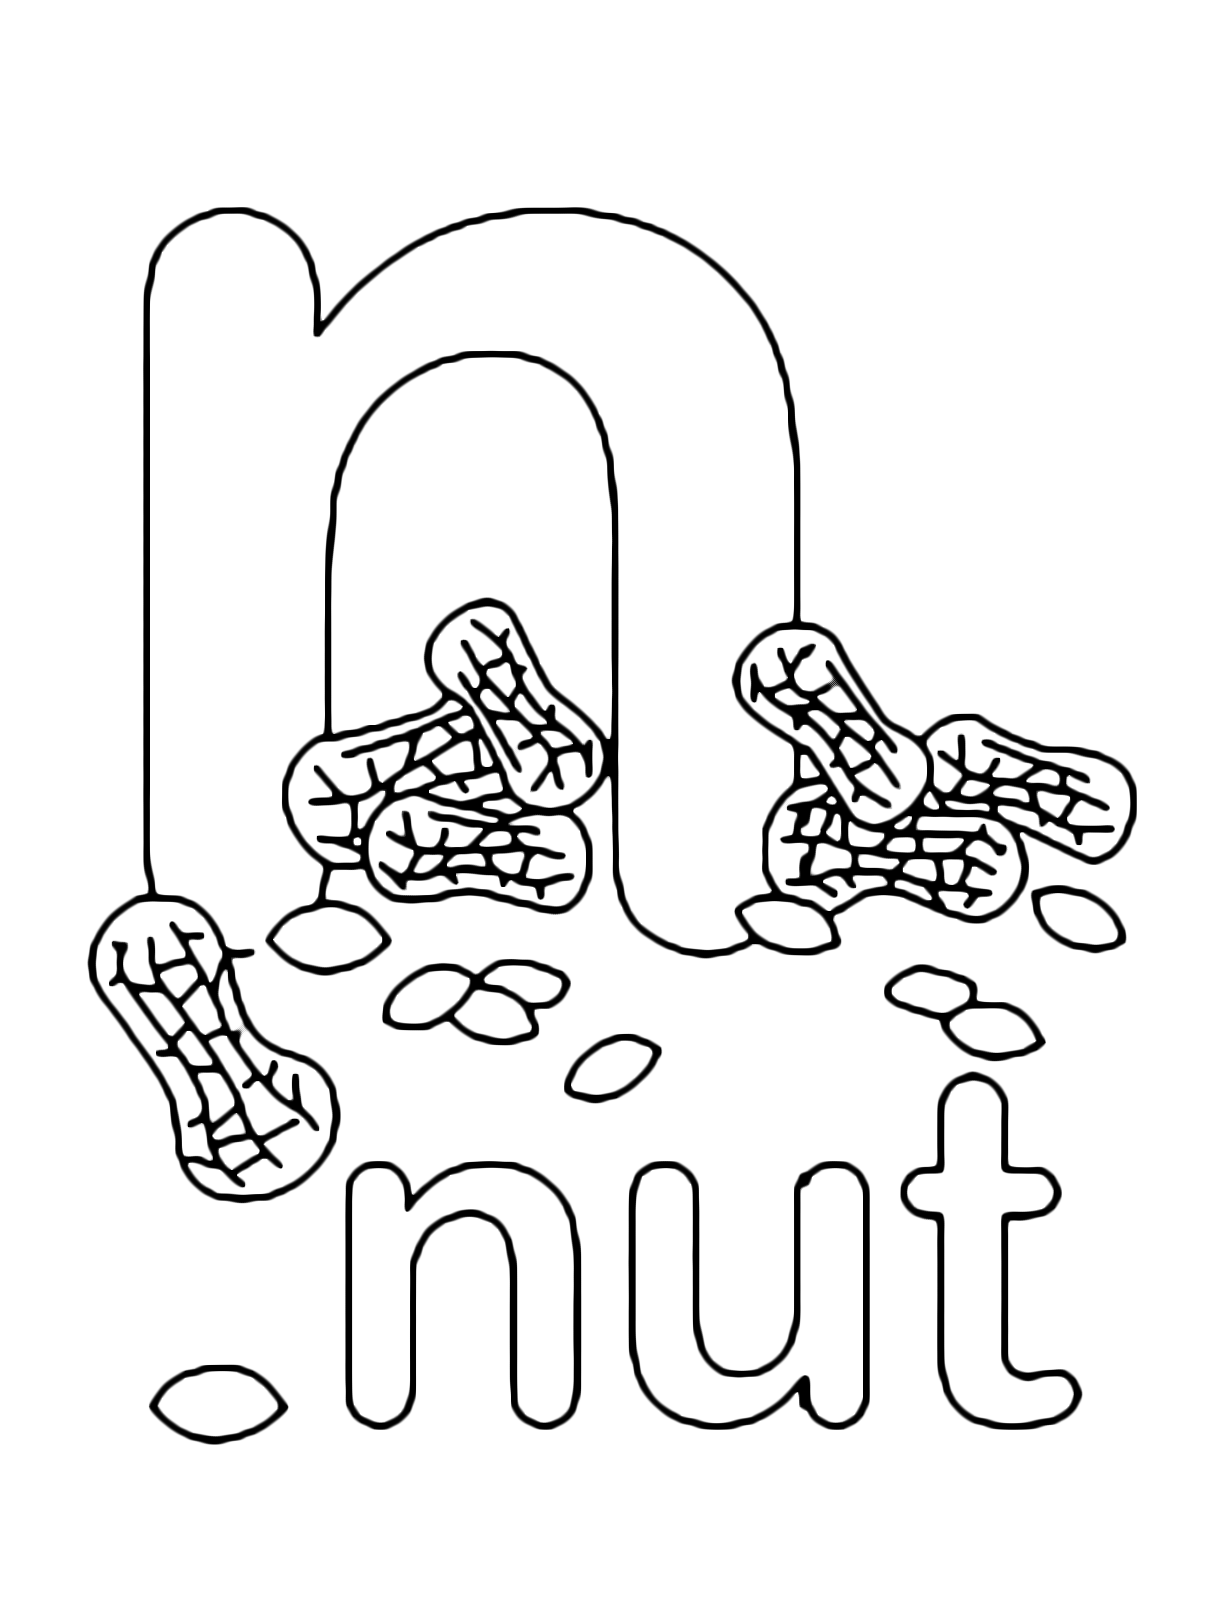 Letters and numbers - n for nuit lowercase letter